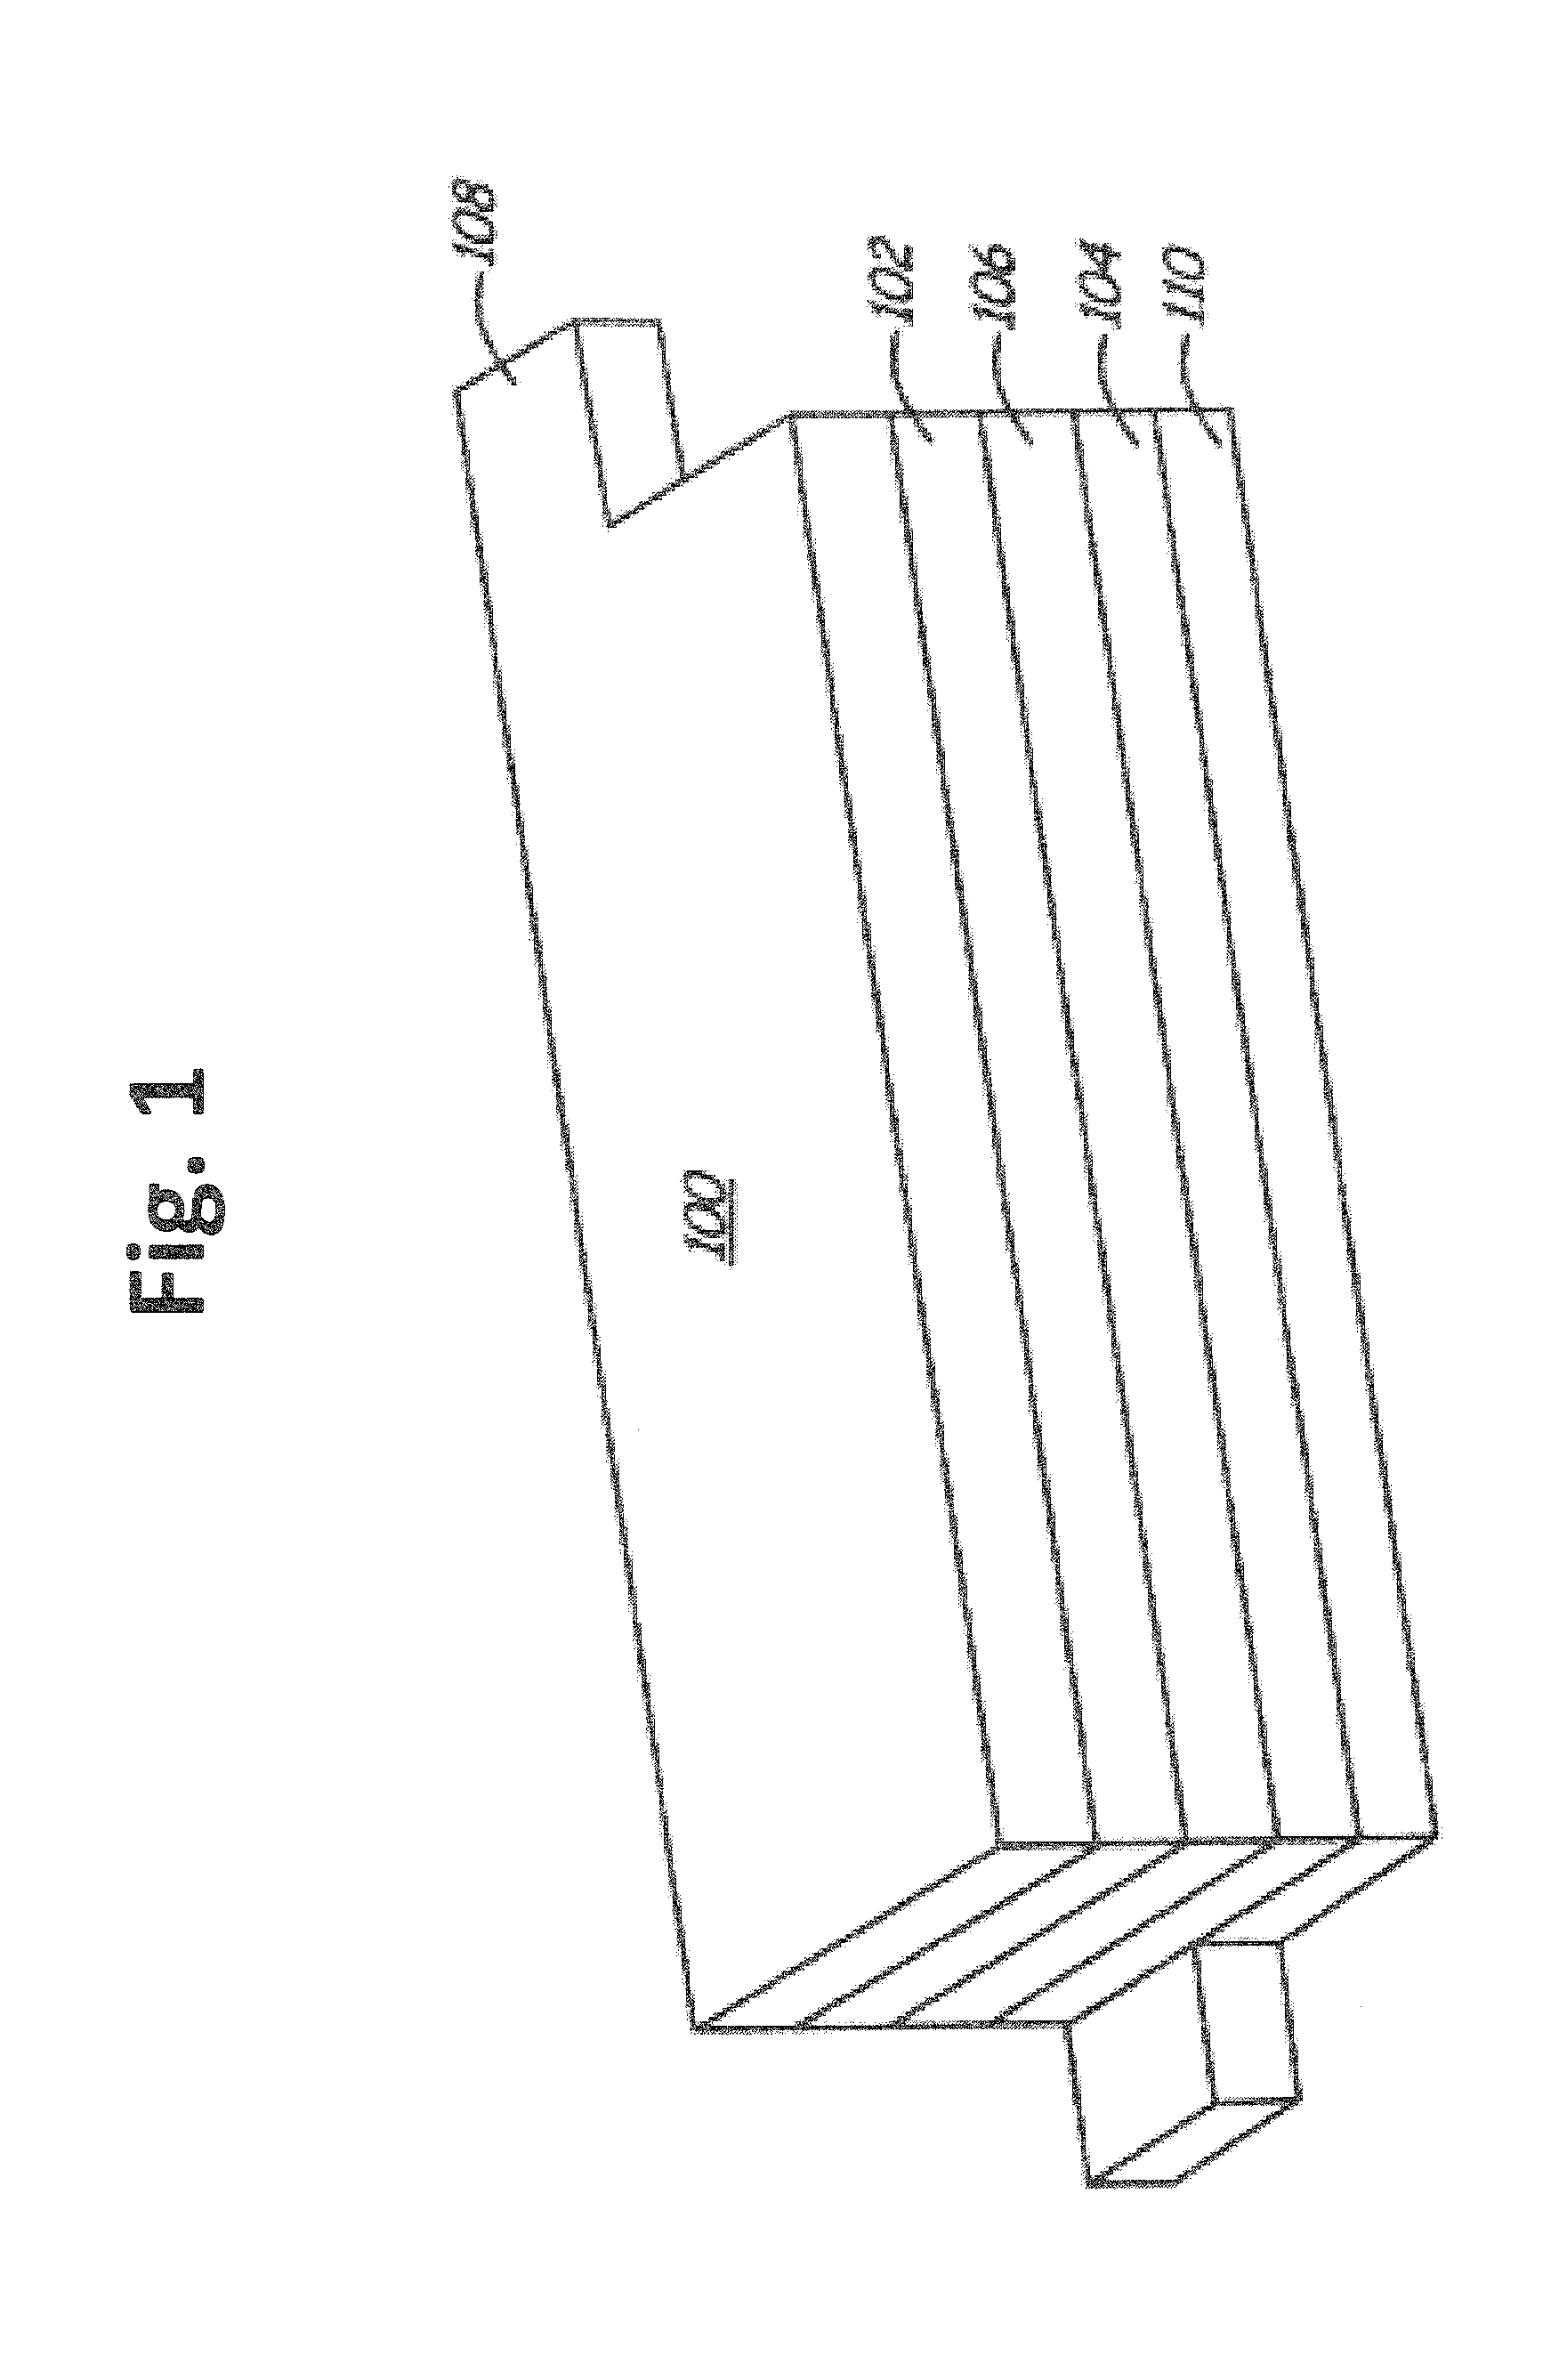 Porous silicon based anode material formed using metal reduction